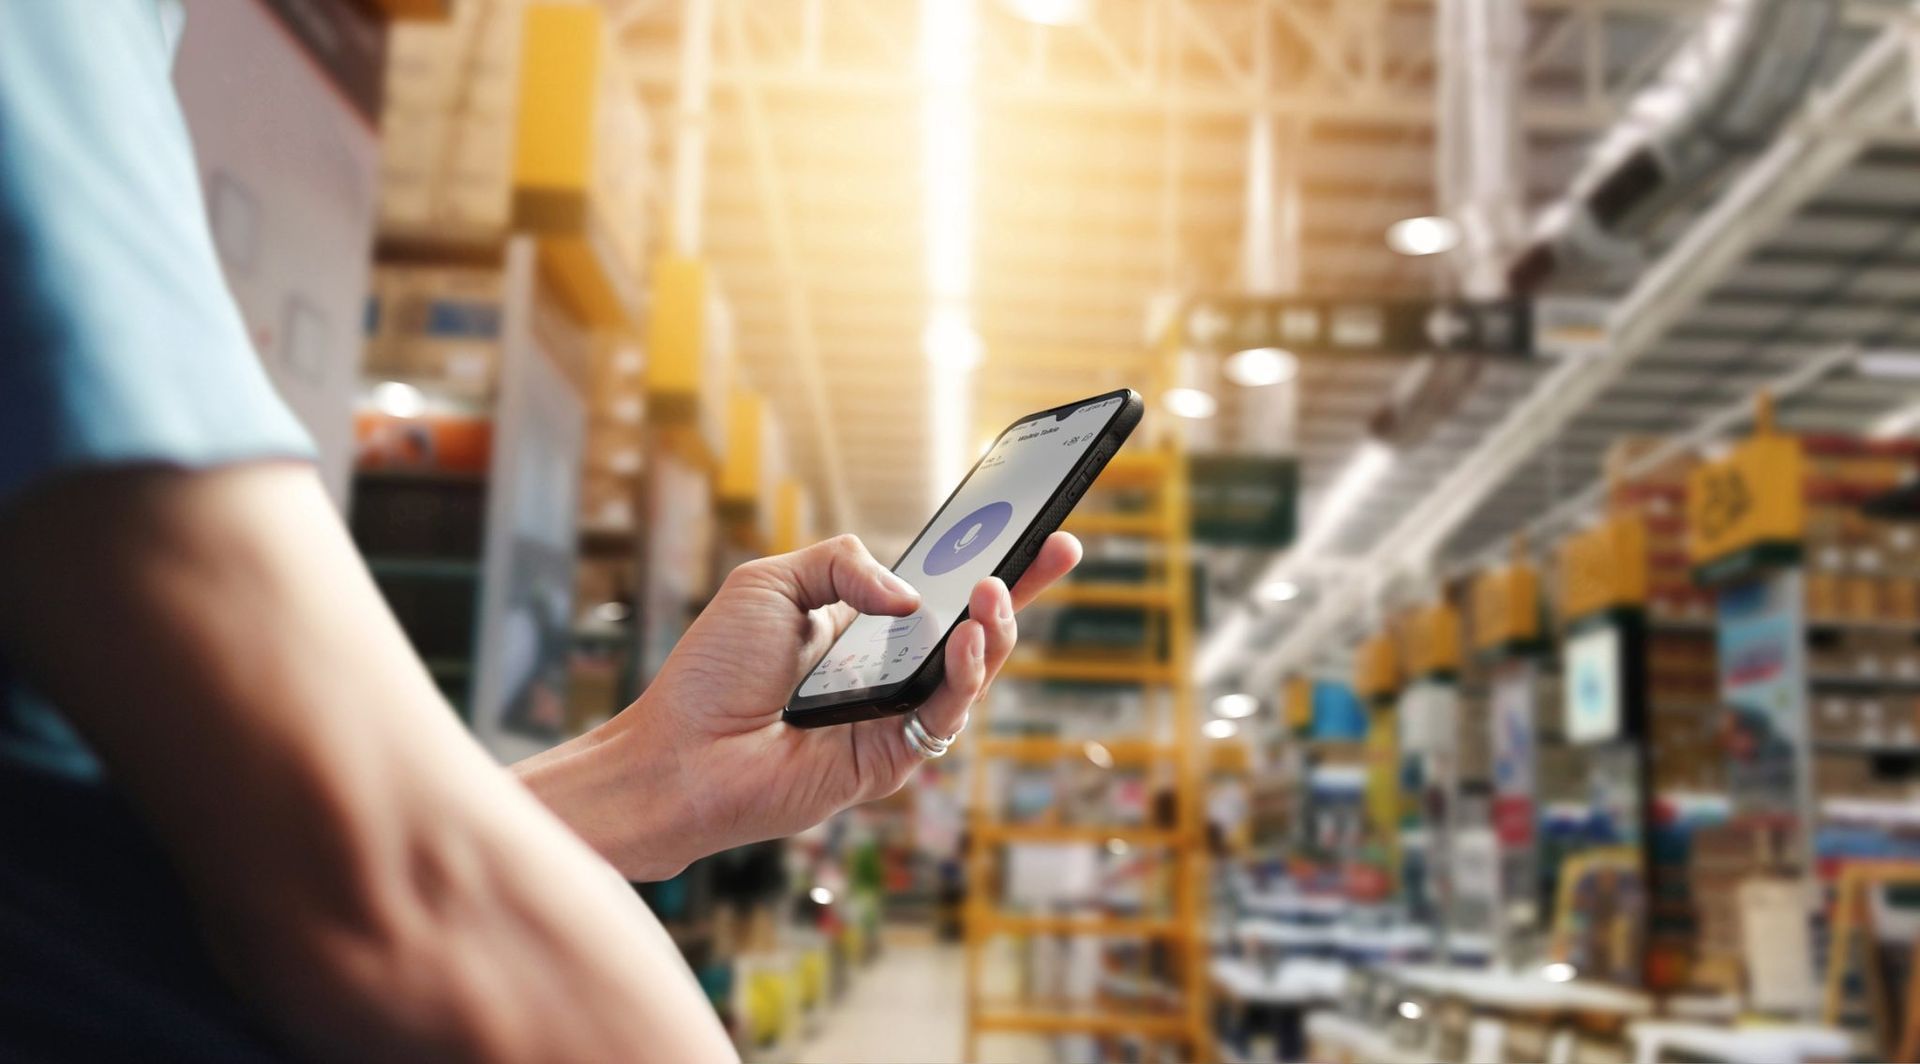 A person is holding a cell phone in a warehouse.